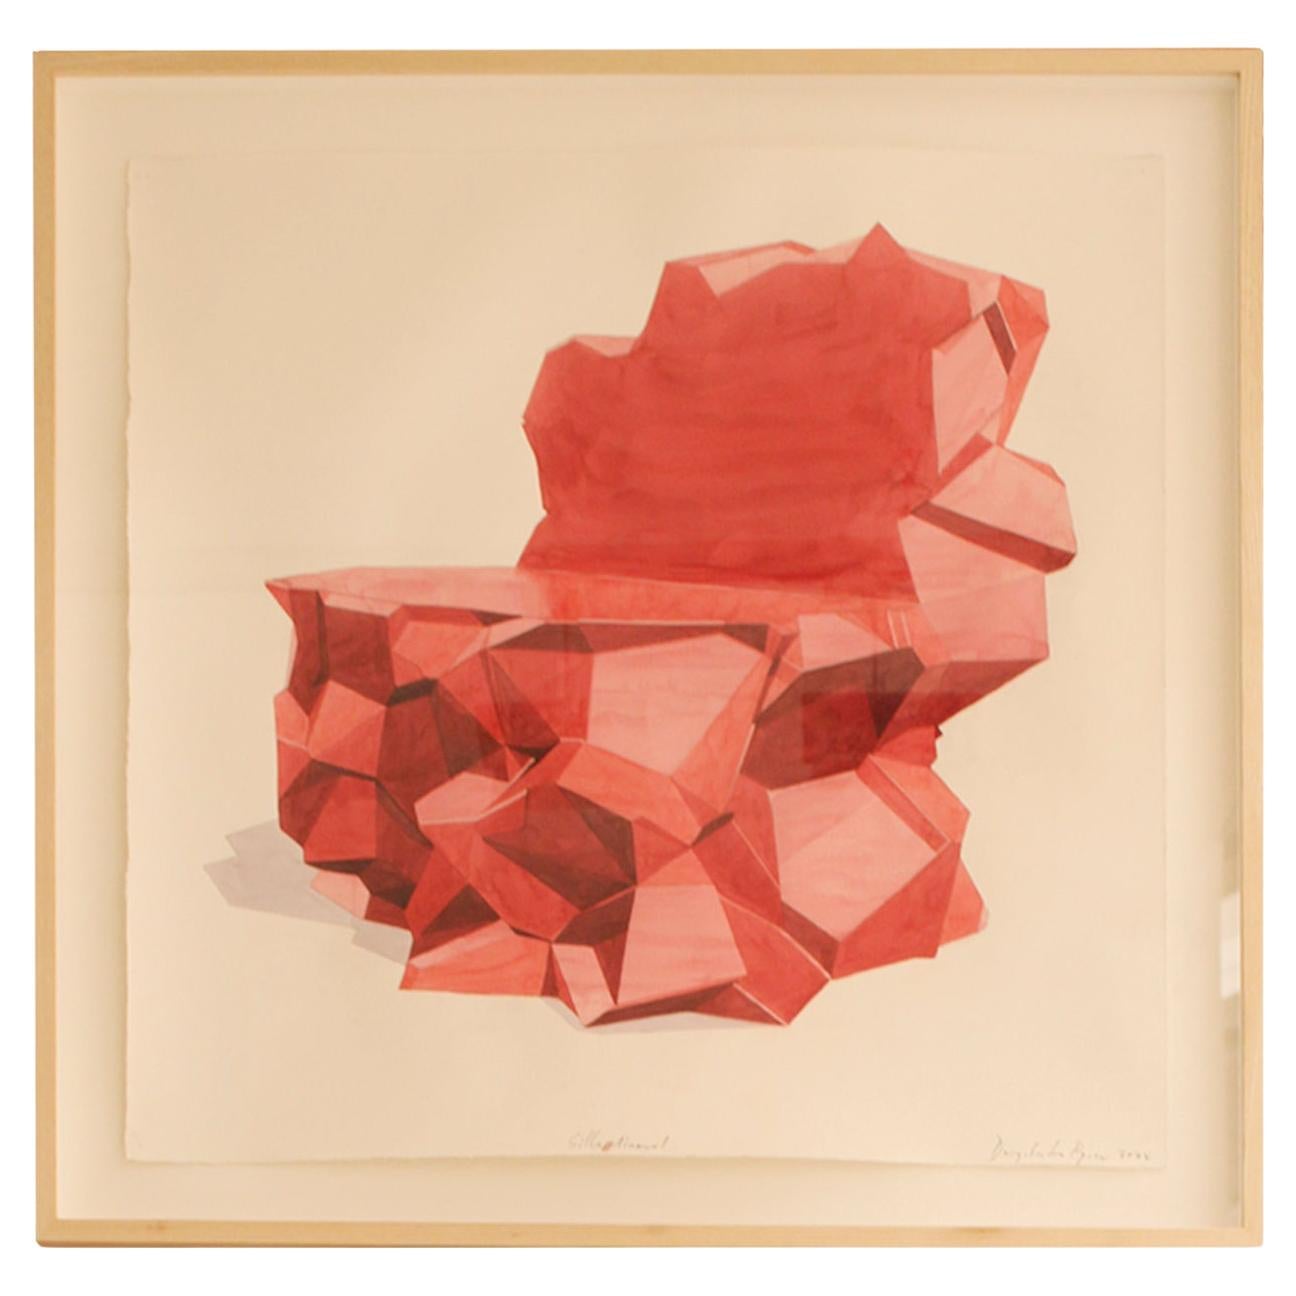 Watercolor of "Mineral" Chair by The Artist Dagoberto Rodriguez